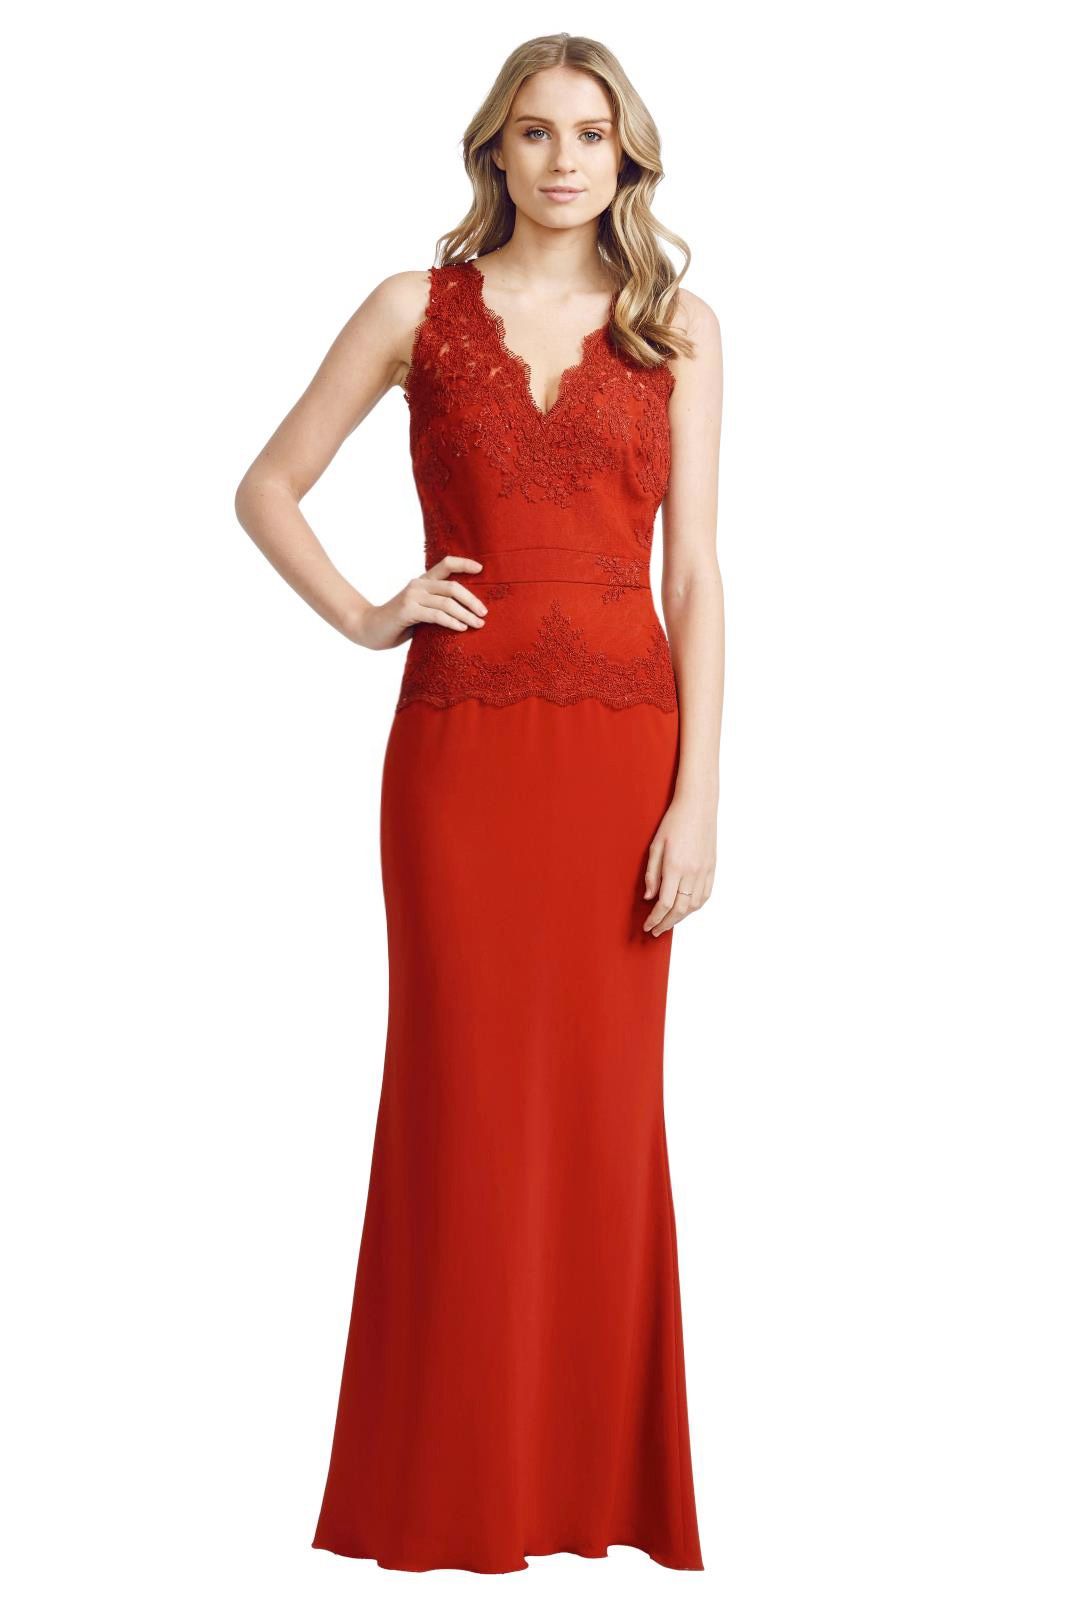 Badgley Mischka - Lace Open Gown - Red - Front 